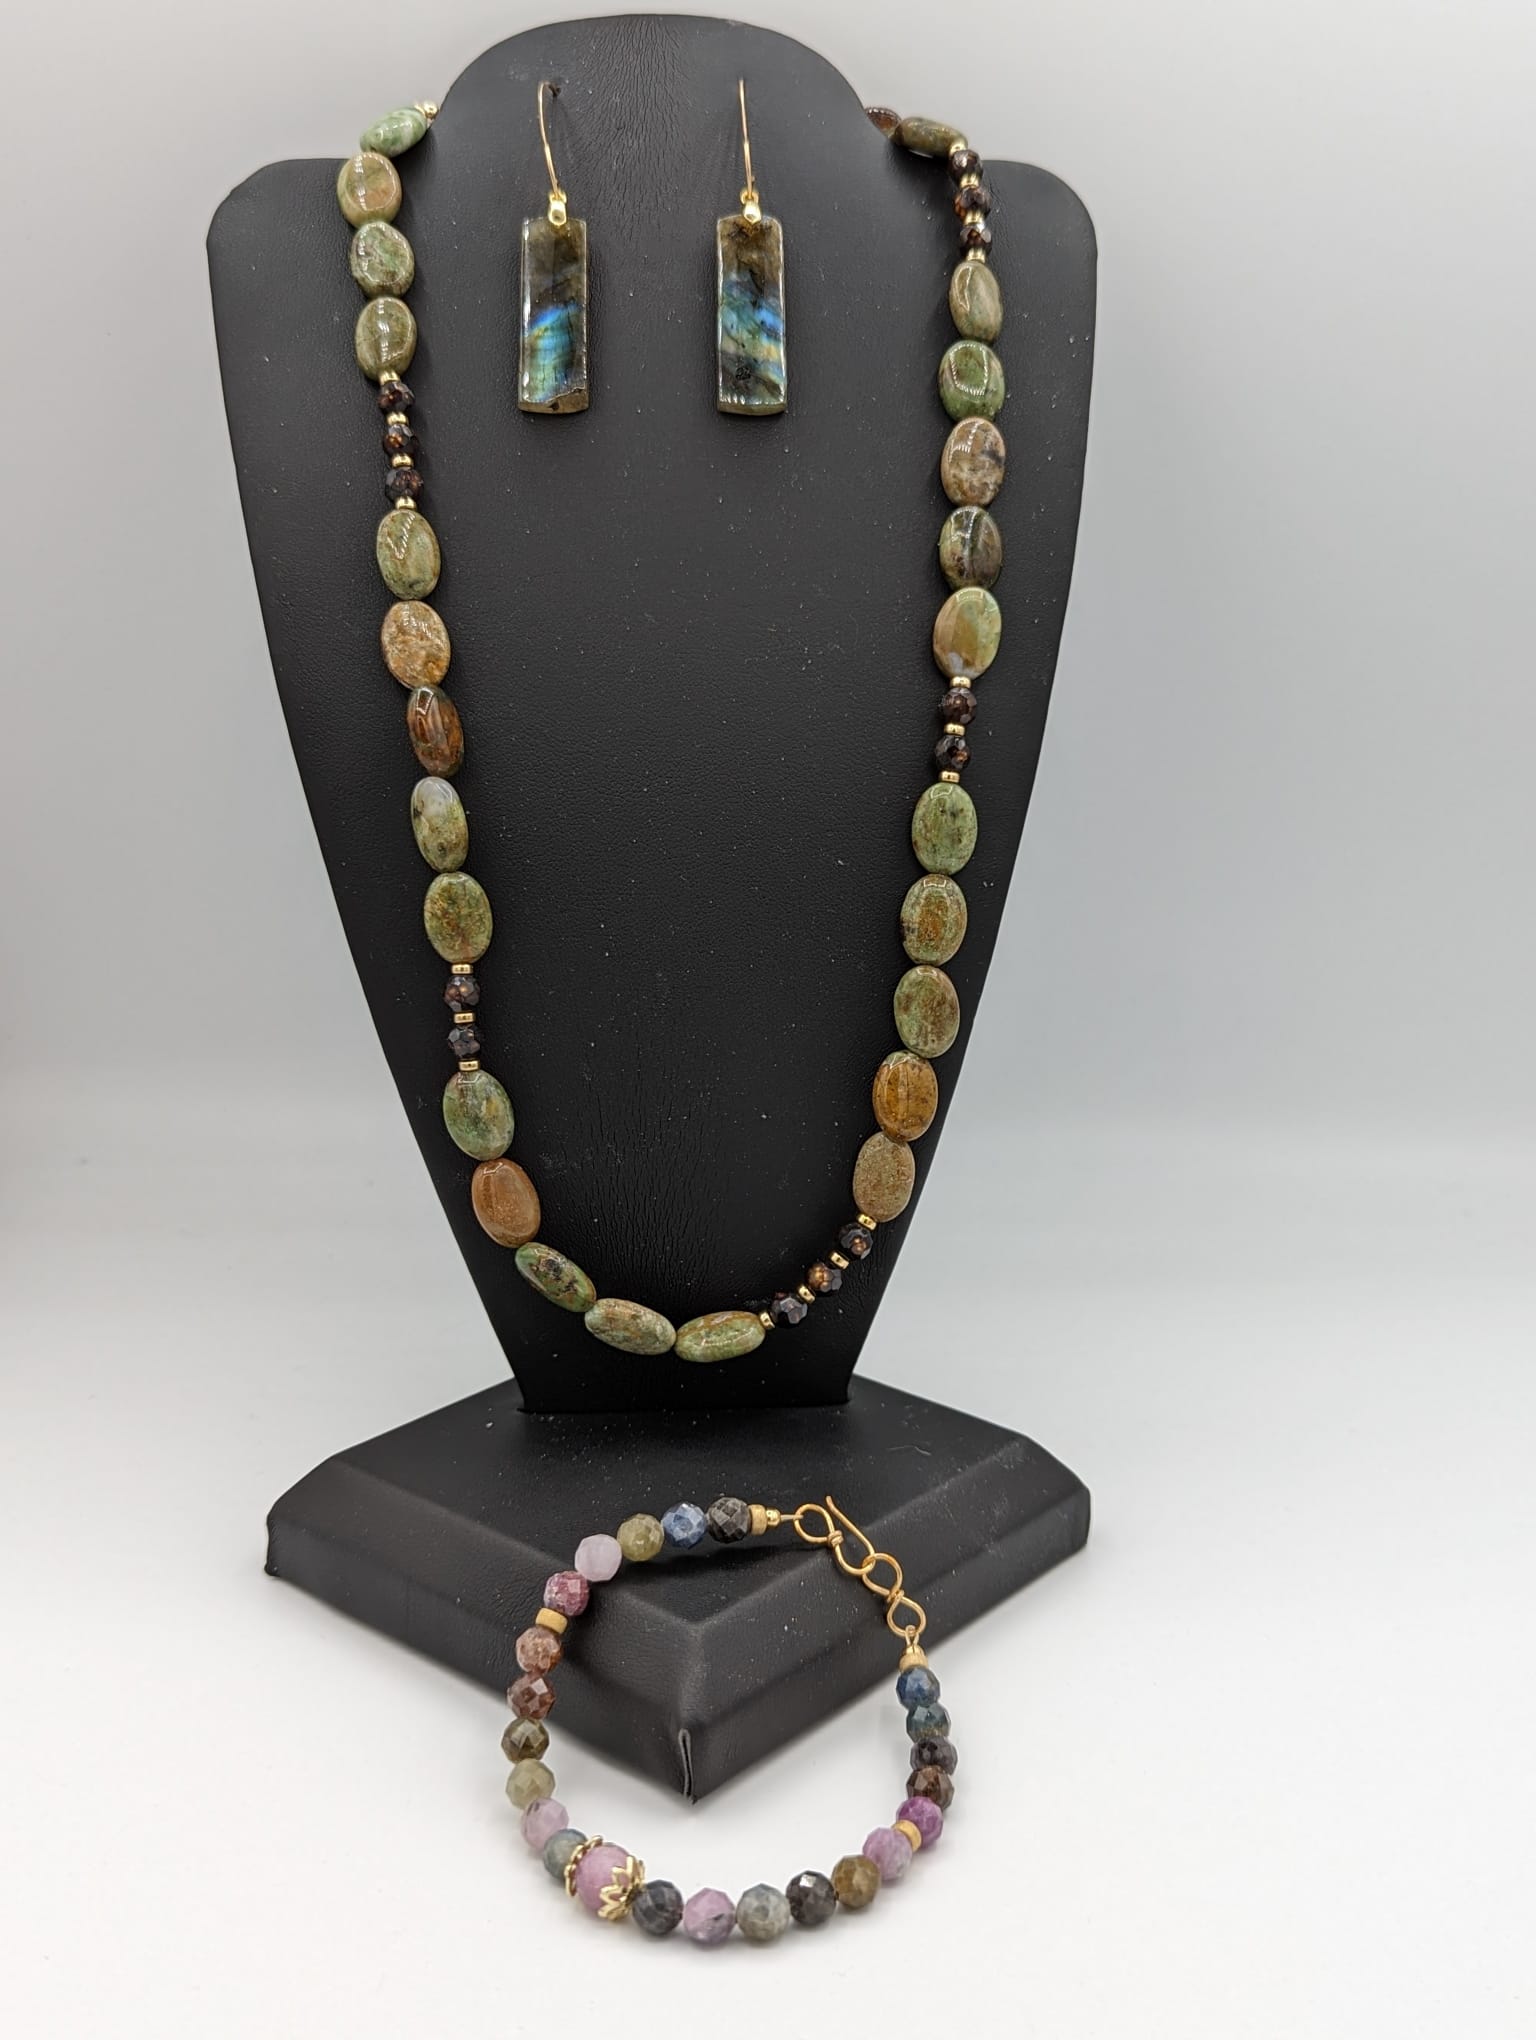 Australian opal necklace pictured with sapphire bracelet and laboradite earrings